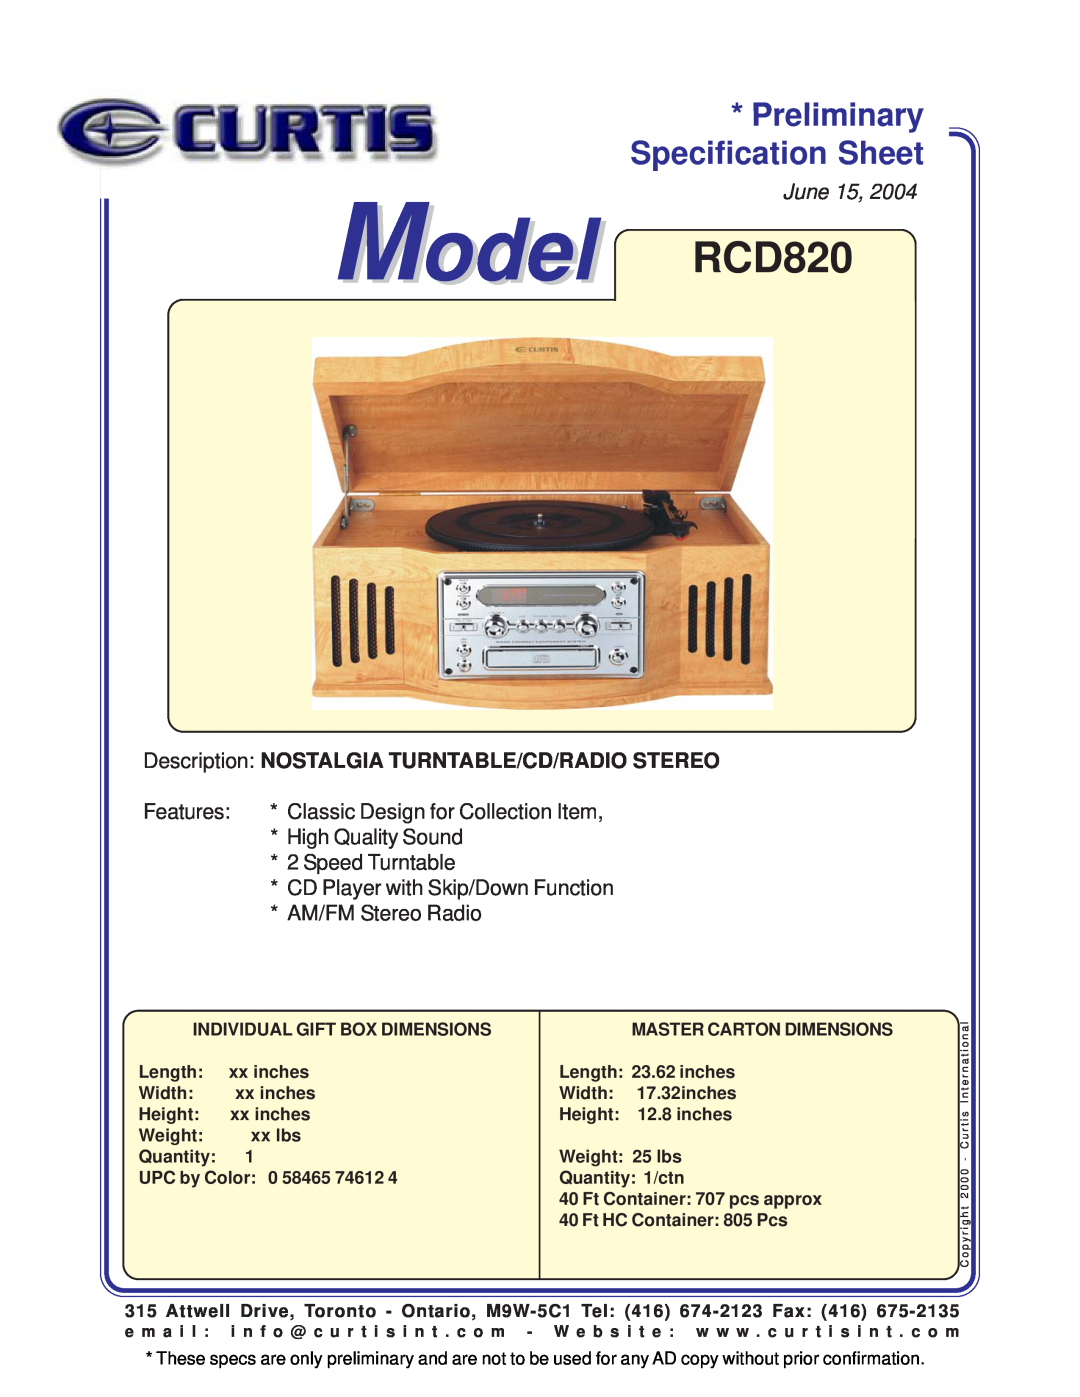 Curtis specifications Specification Sheet, Model RCD820, Preliminary, June, Features, High Quality Sound 